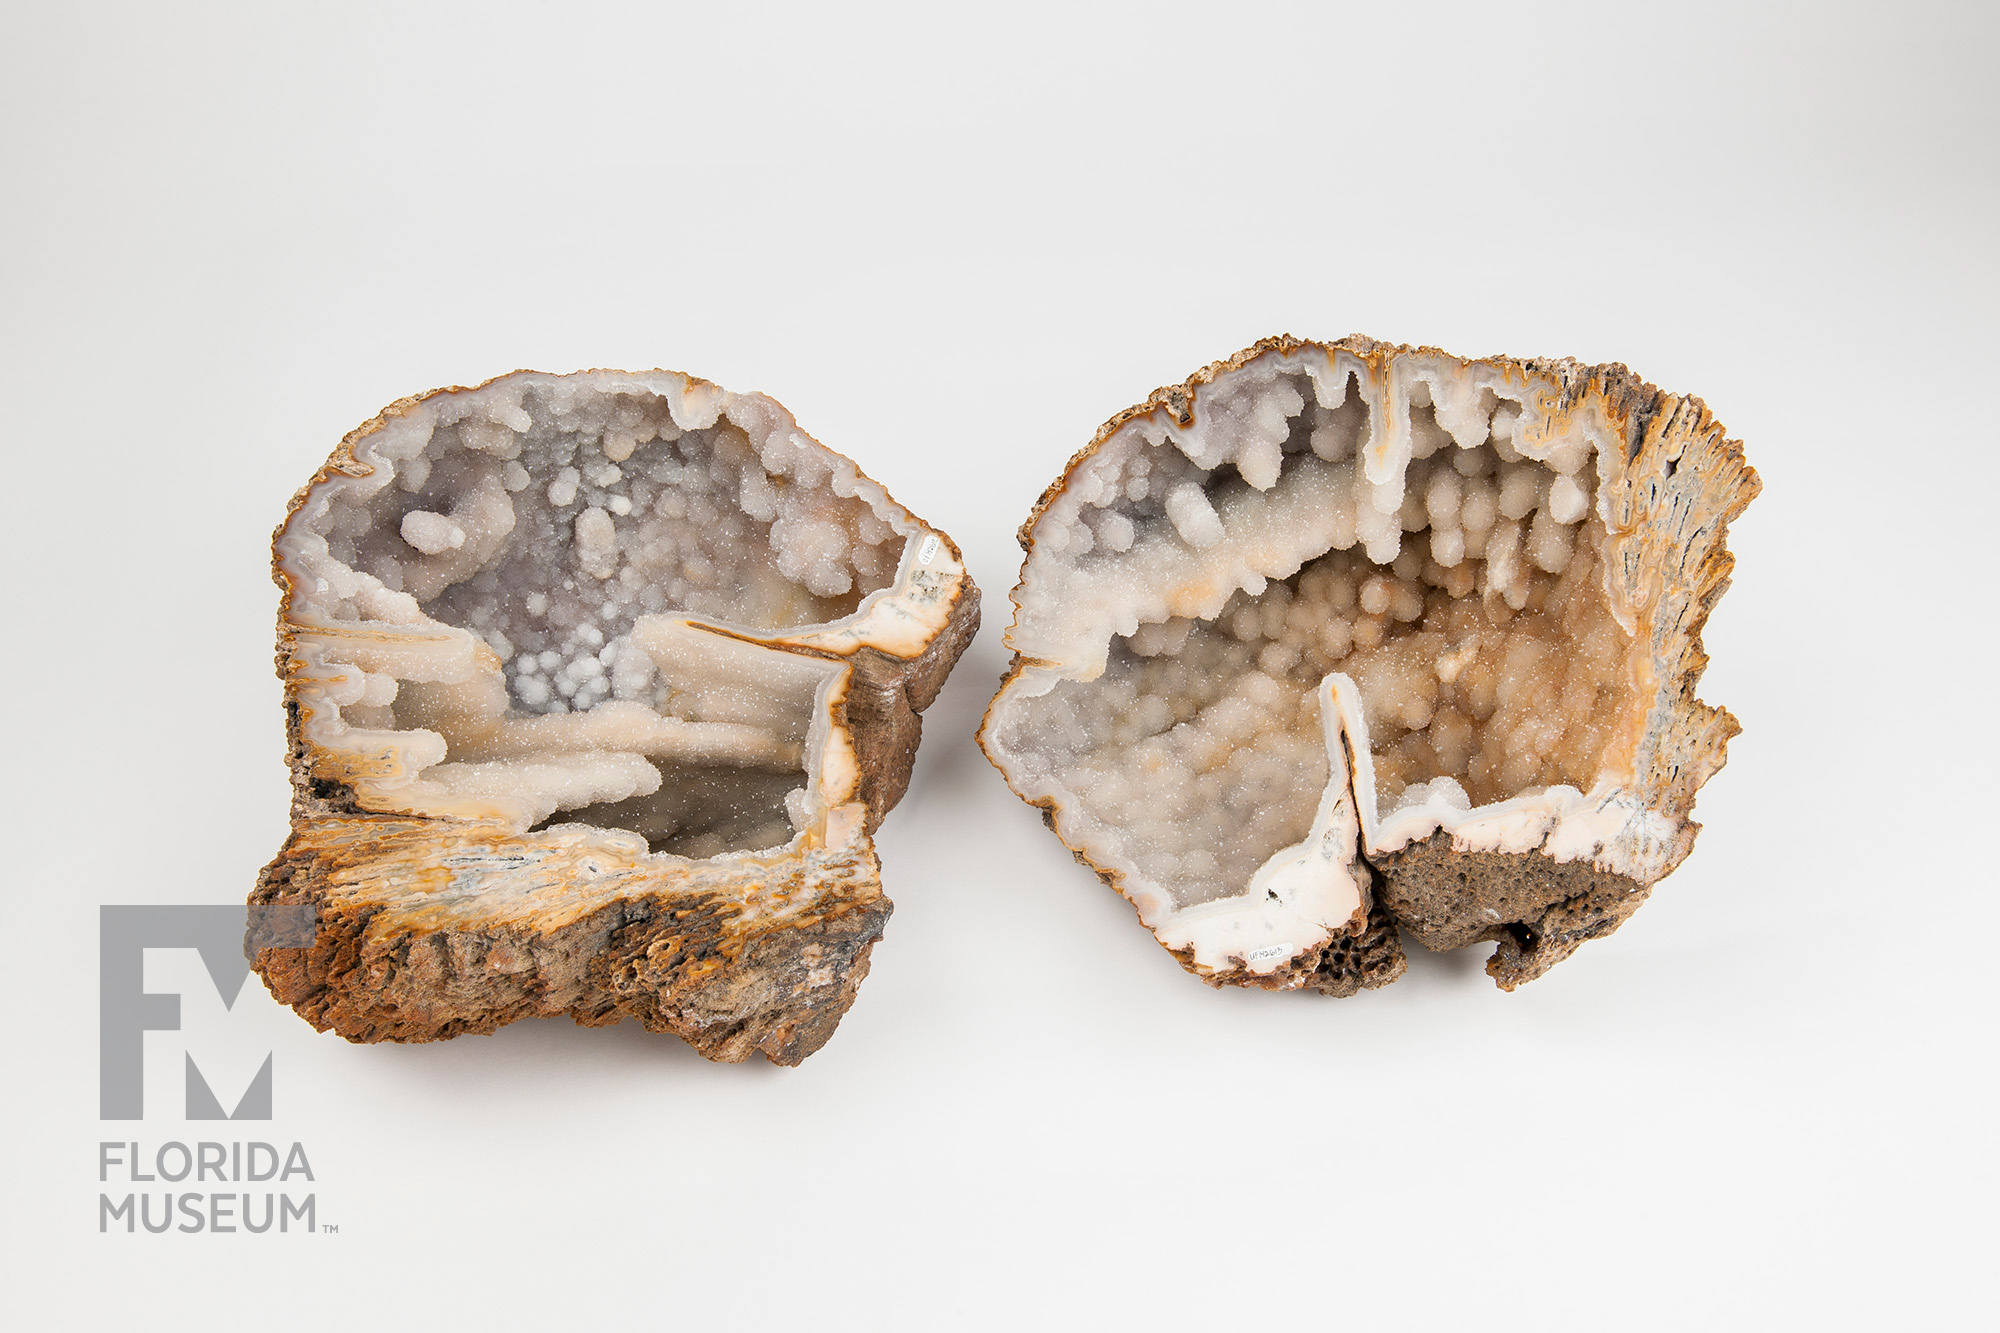 All Natural Polished Agatized Fossil Coral from South Georgia/North Florida